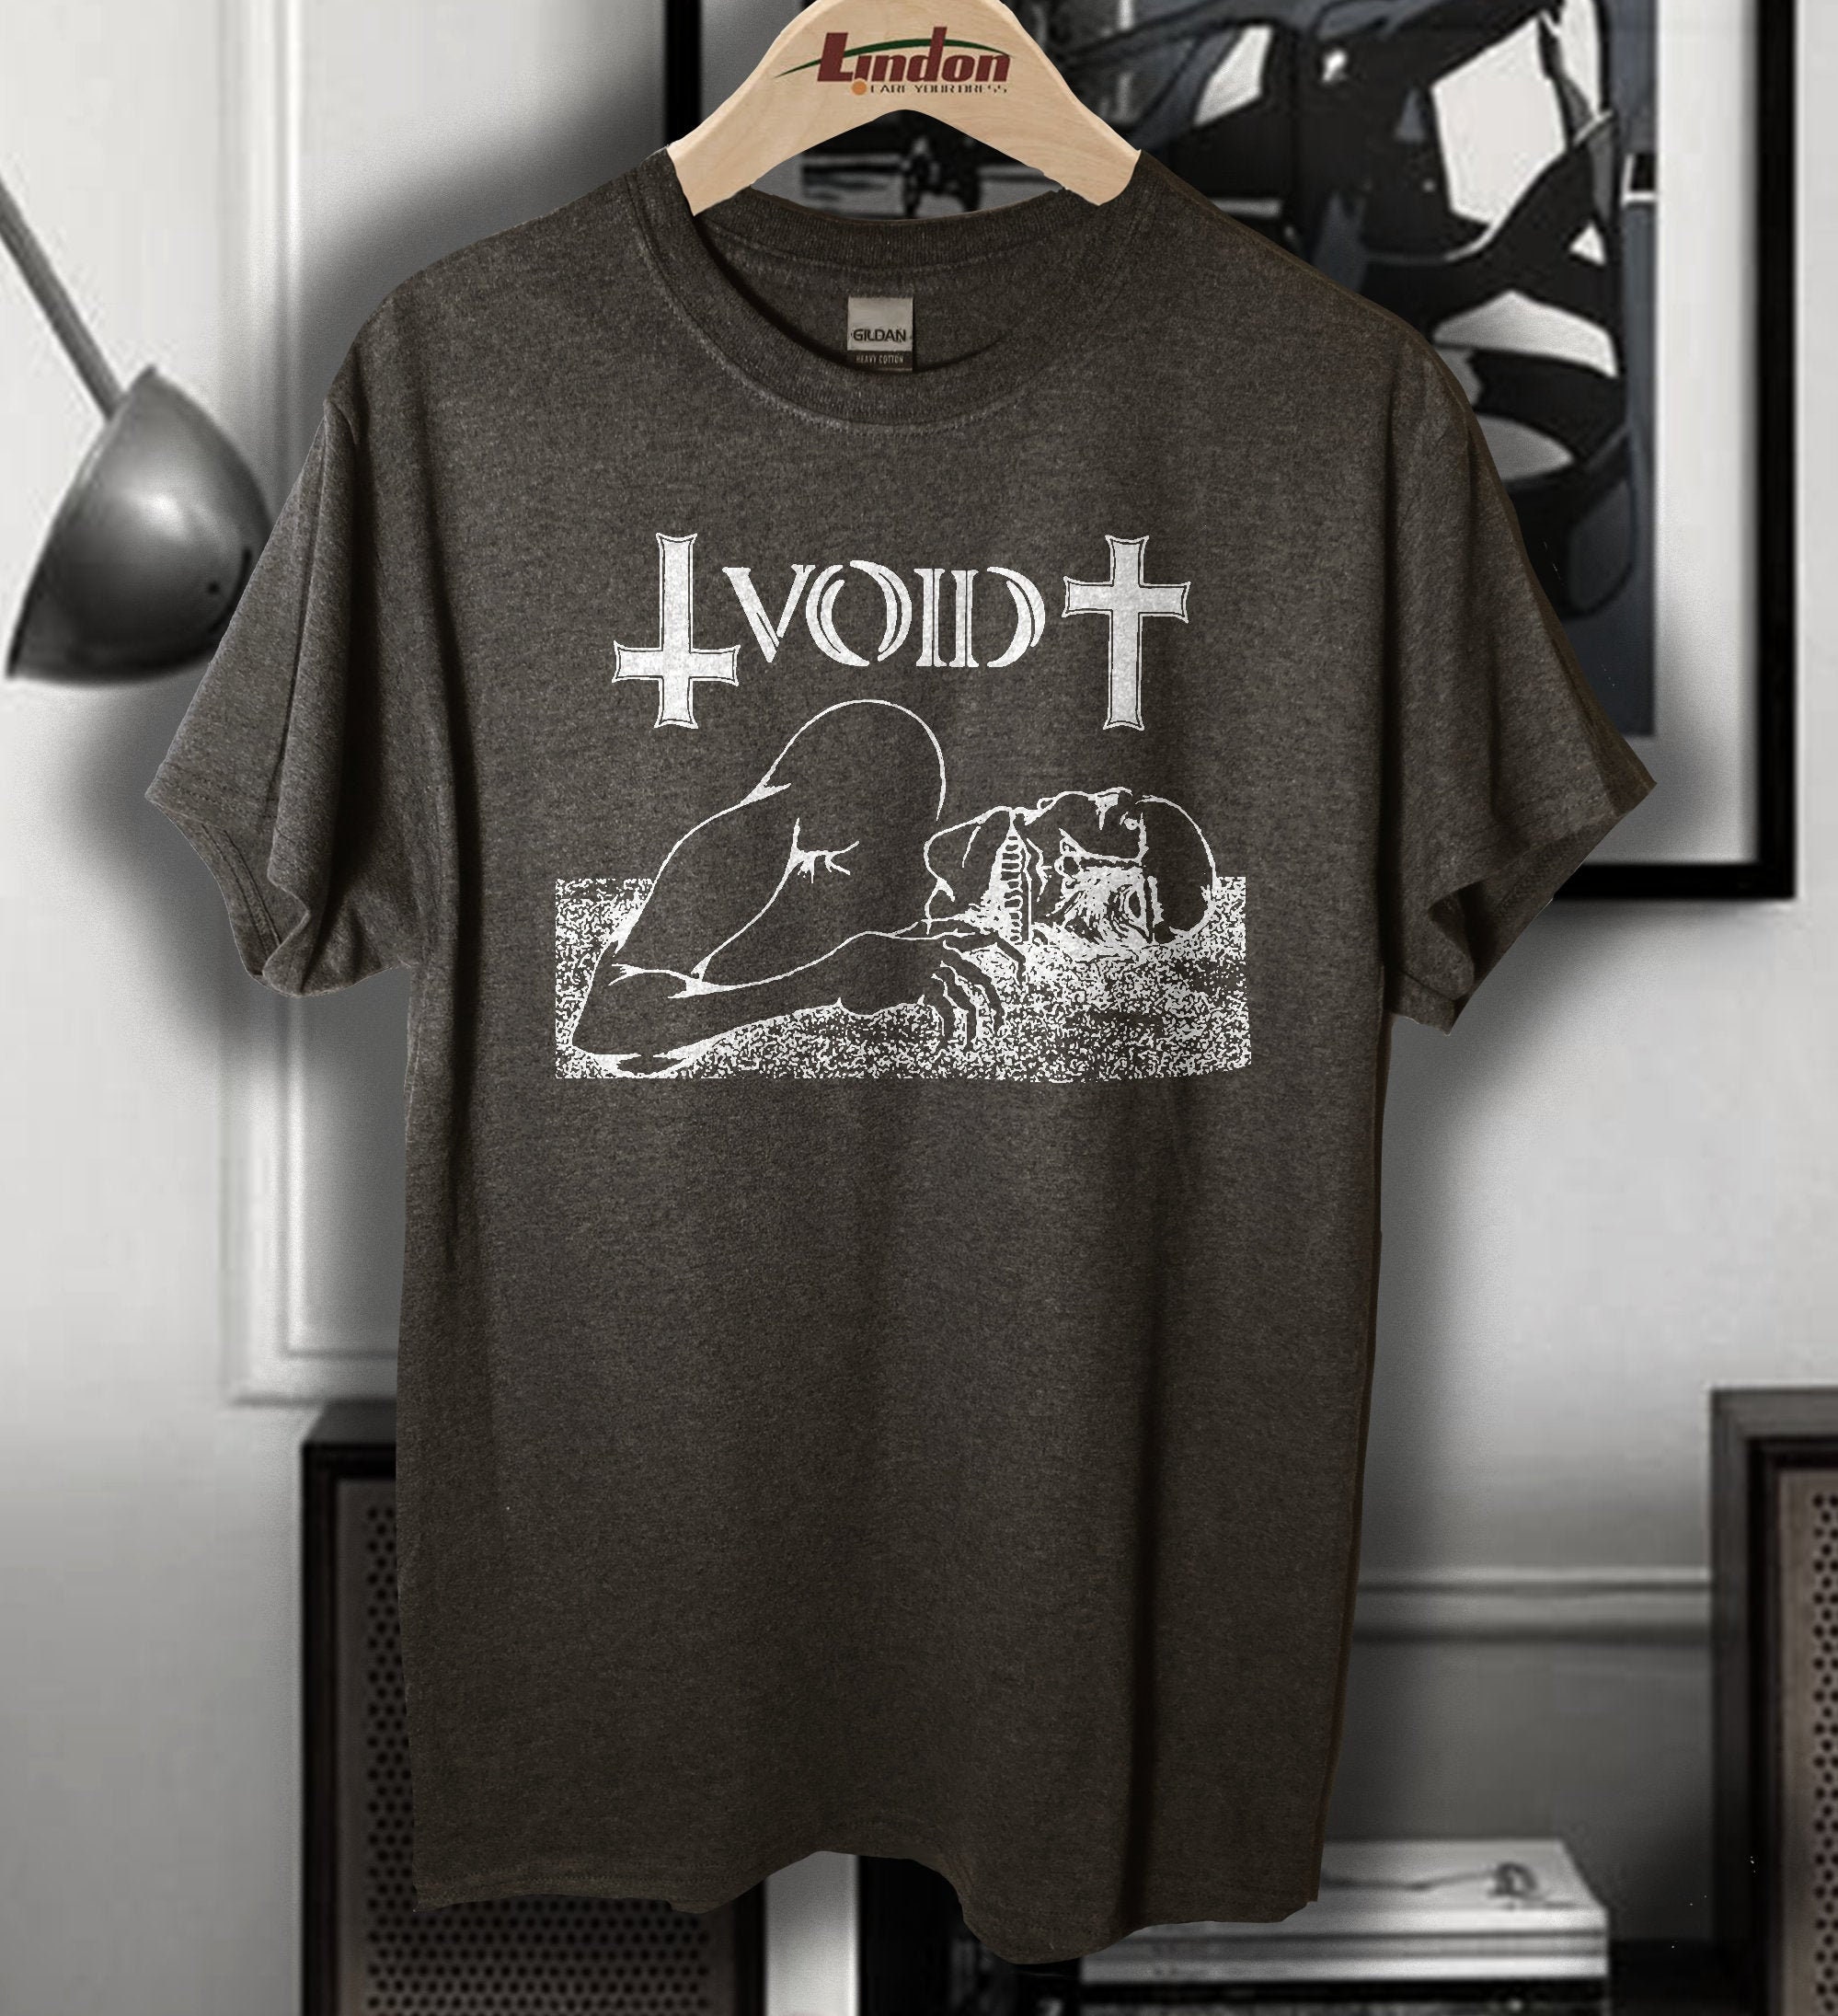 Void Band T Shirt T Screen Print Sleeve | Etsy